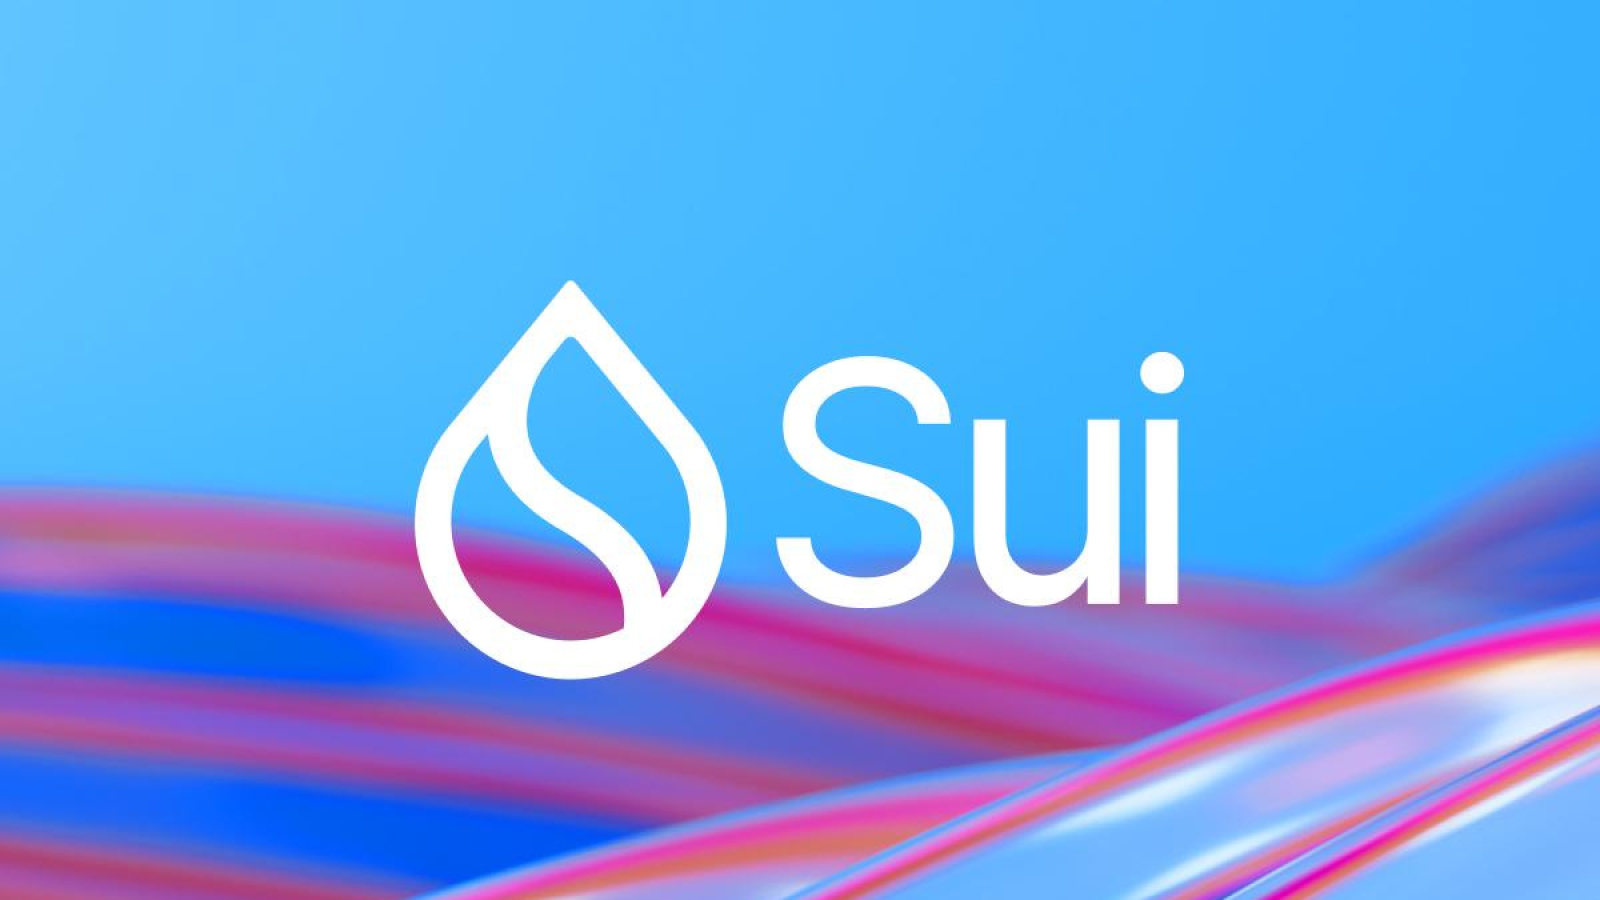 Sui and Mesh Combine Forces to Bring Simplified Transactions Across the Sui Ecosystem